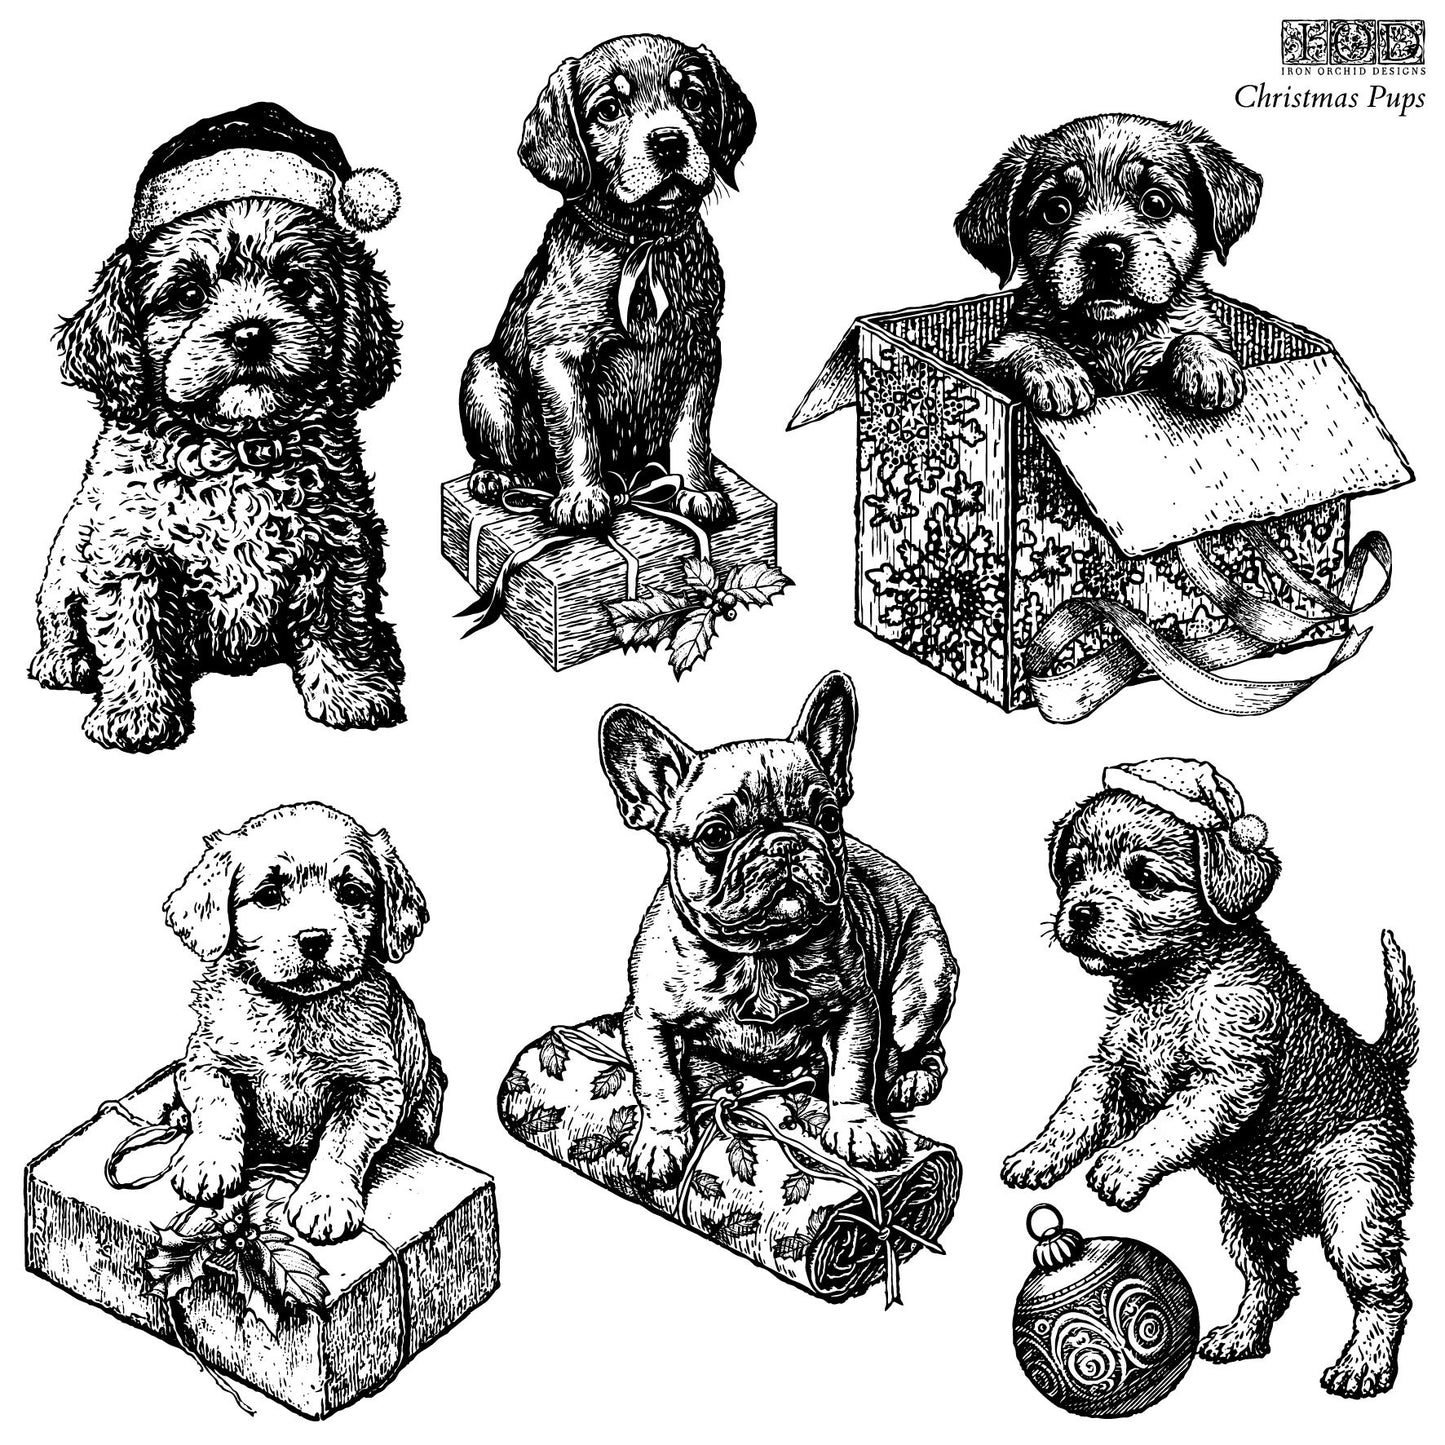 Christmas Pups 12x12 Decor Stamp *Limited Edition*